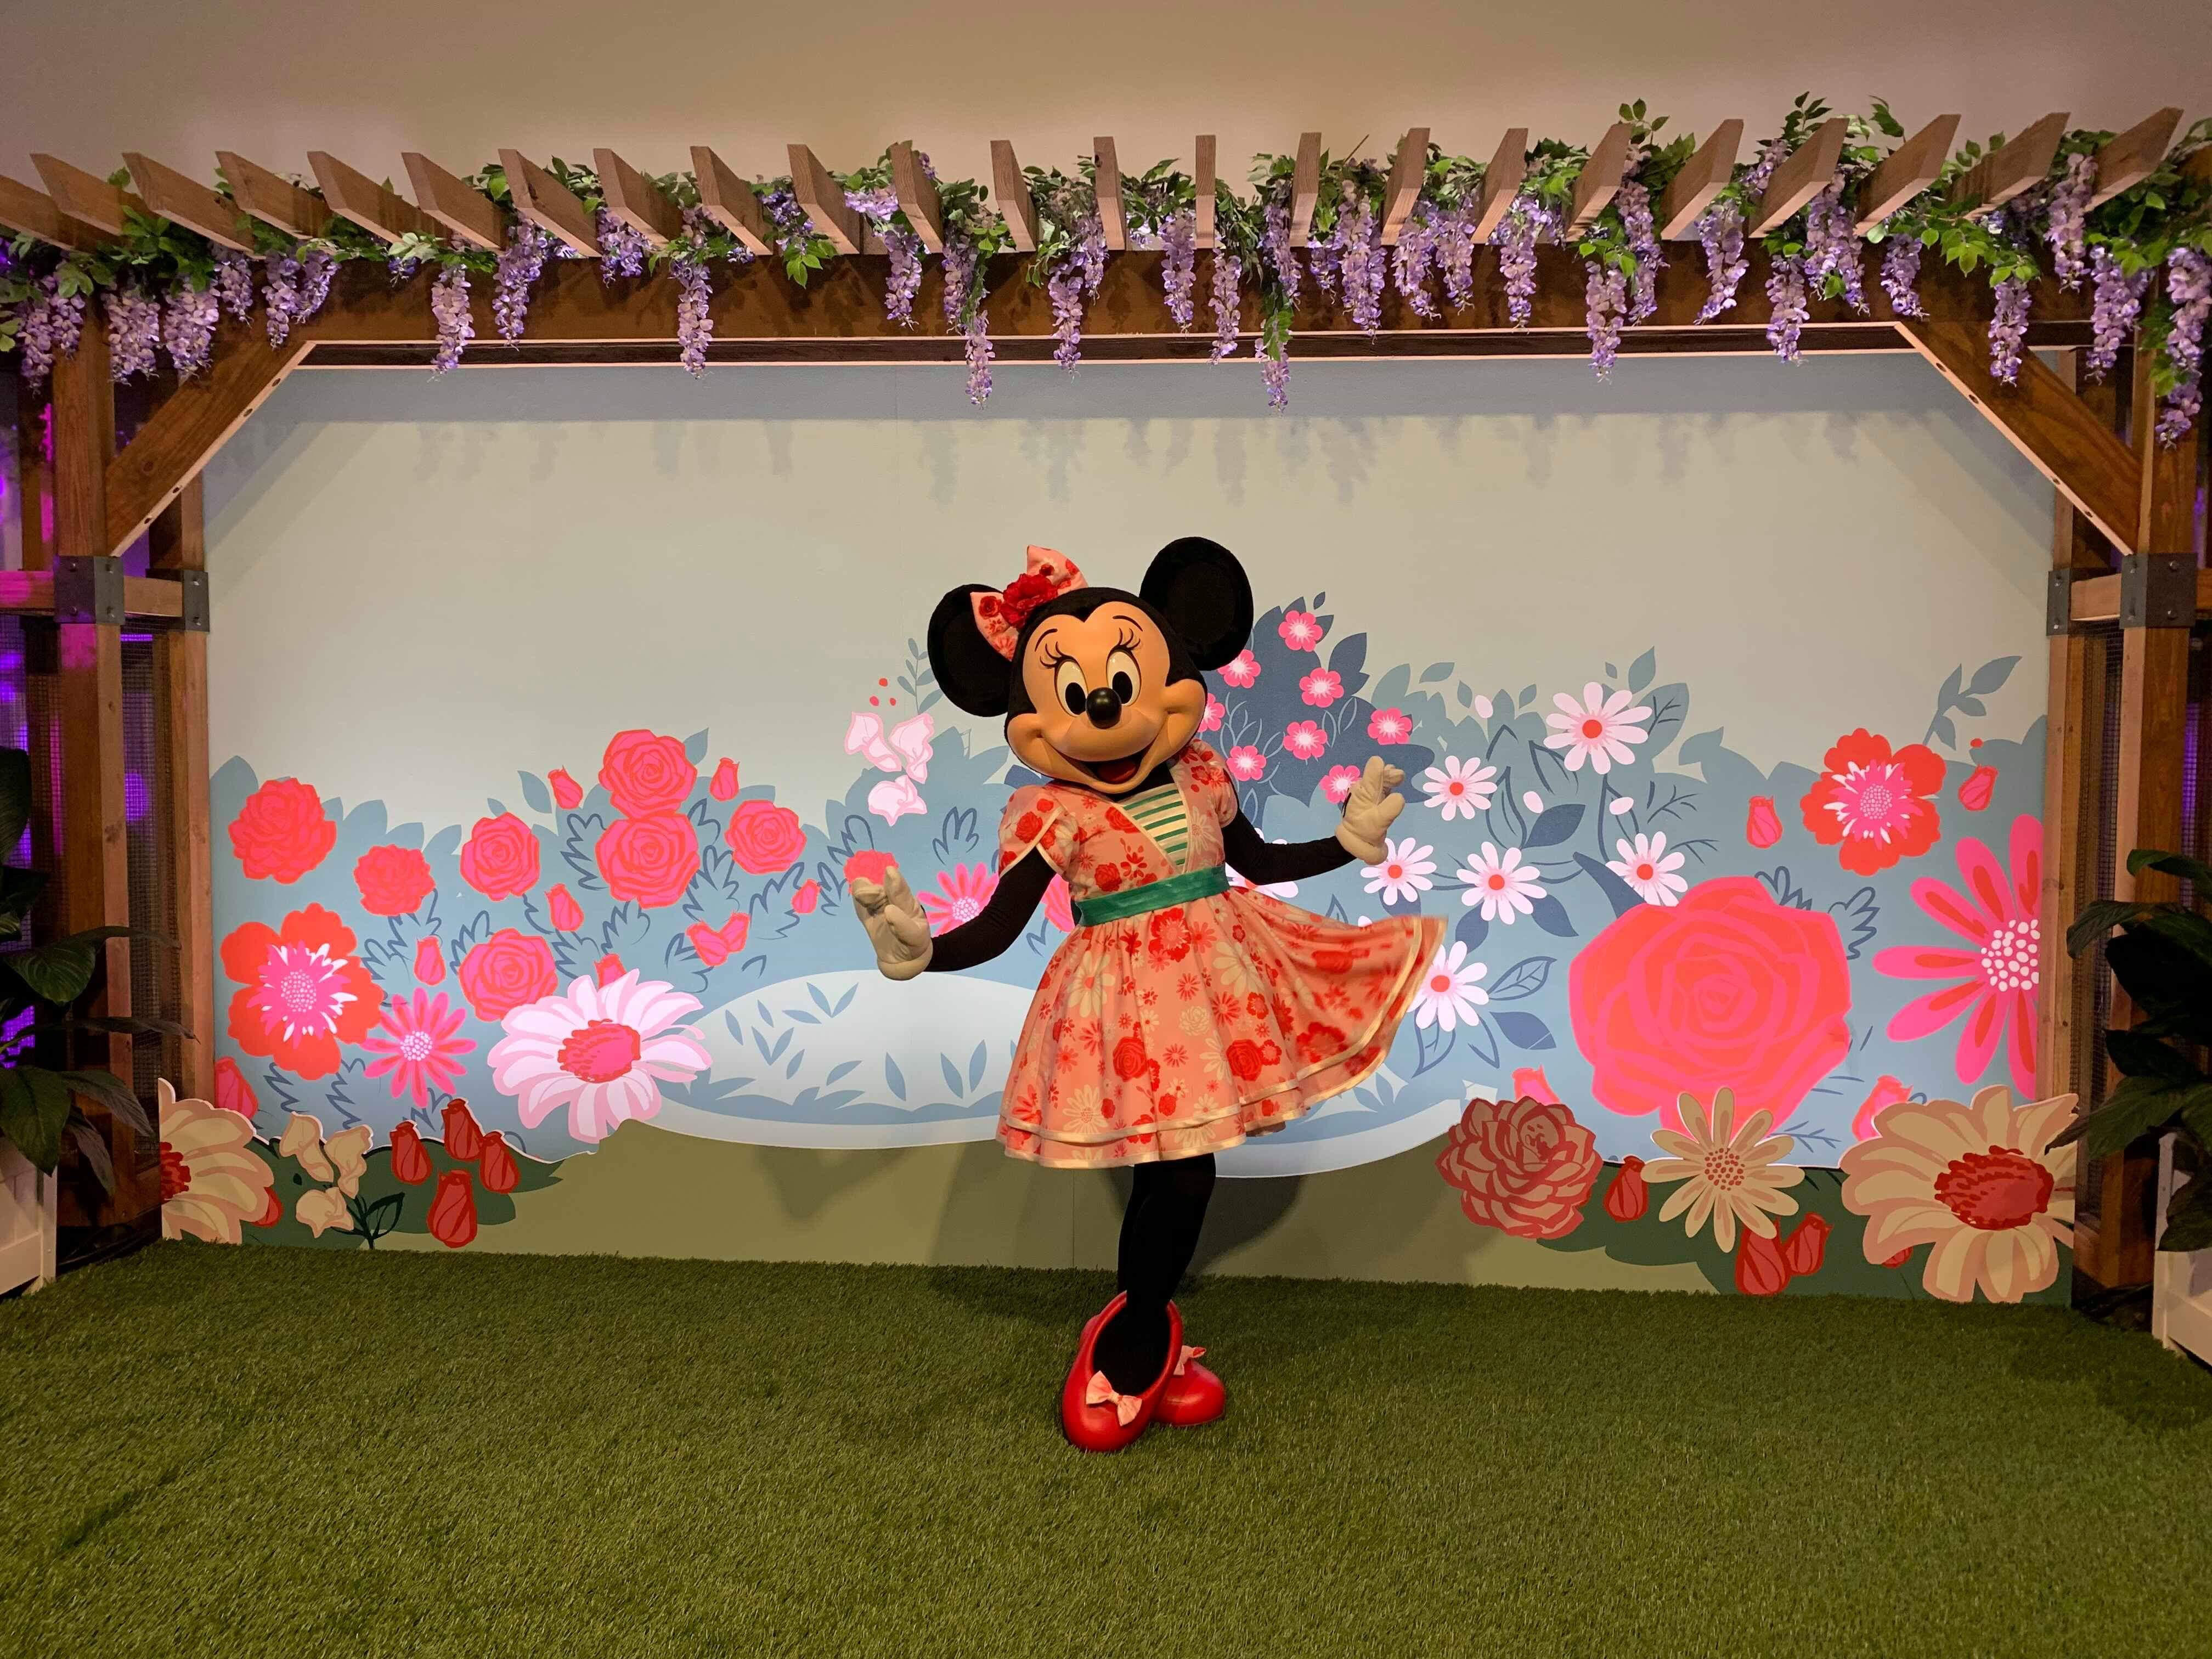 Minnie’s Garden Party Meet and Greet Available at Epcot for a Limited Time